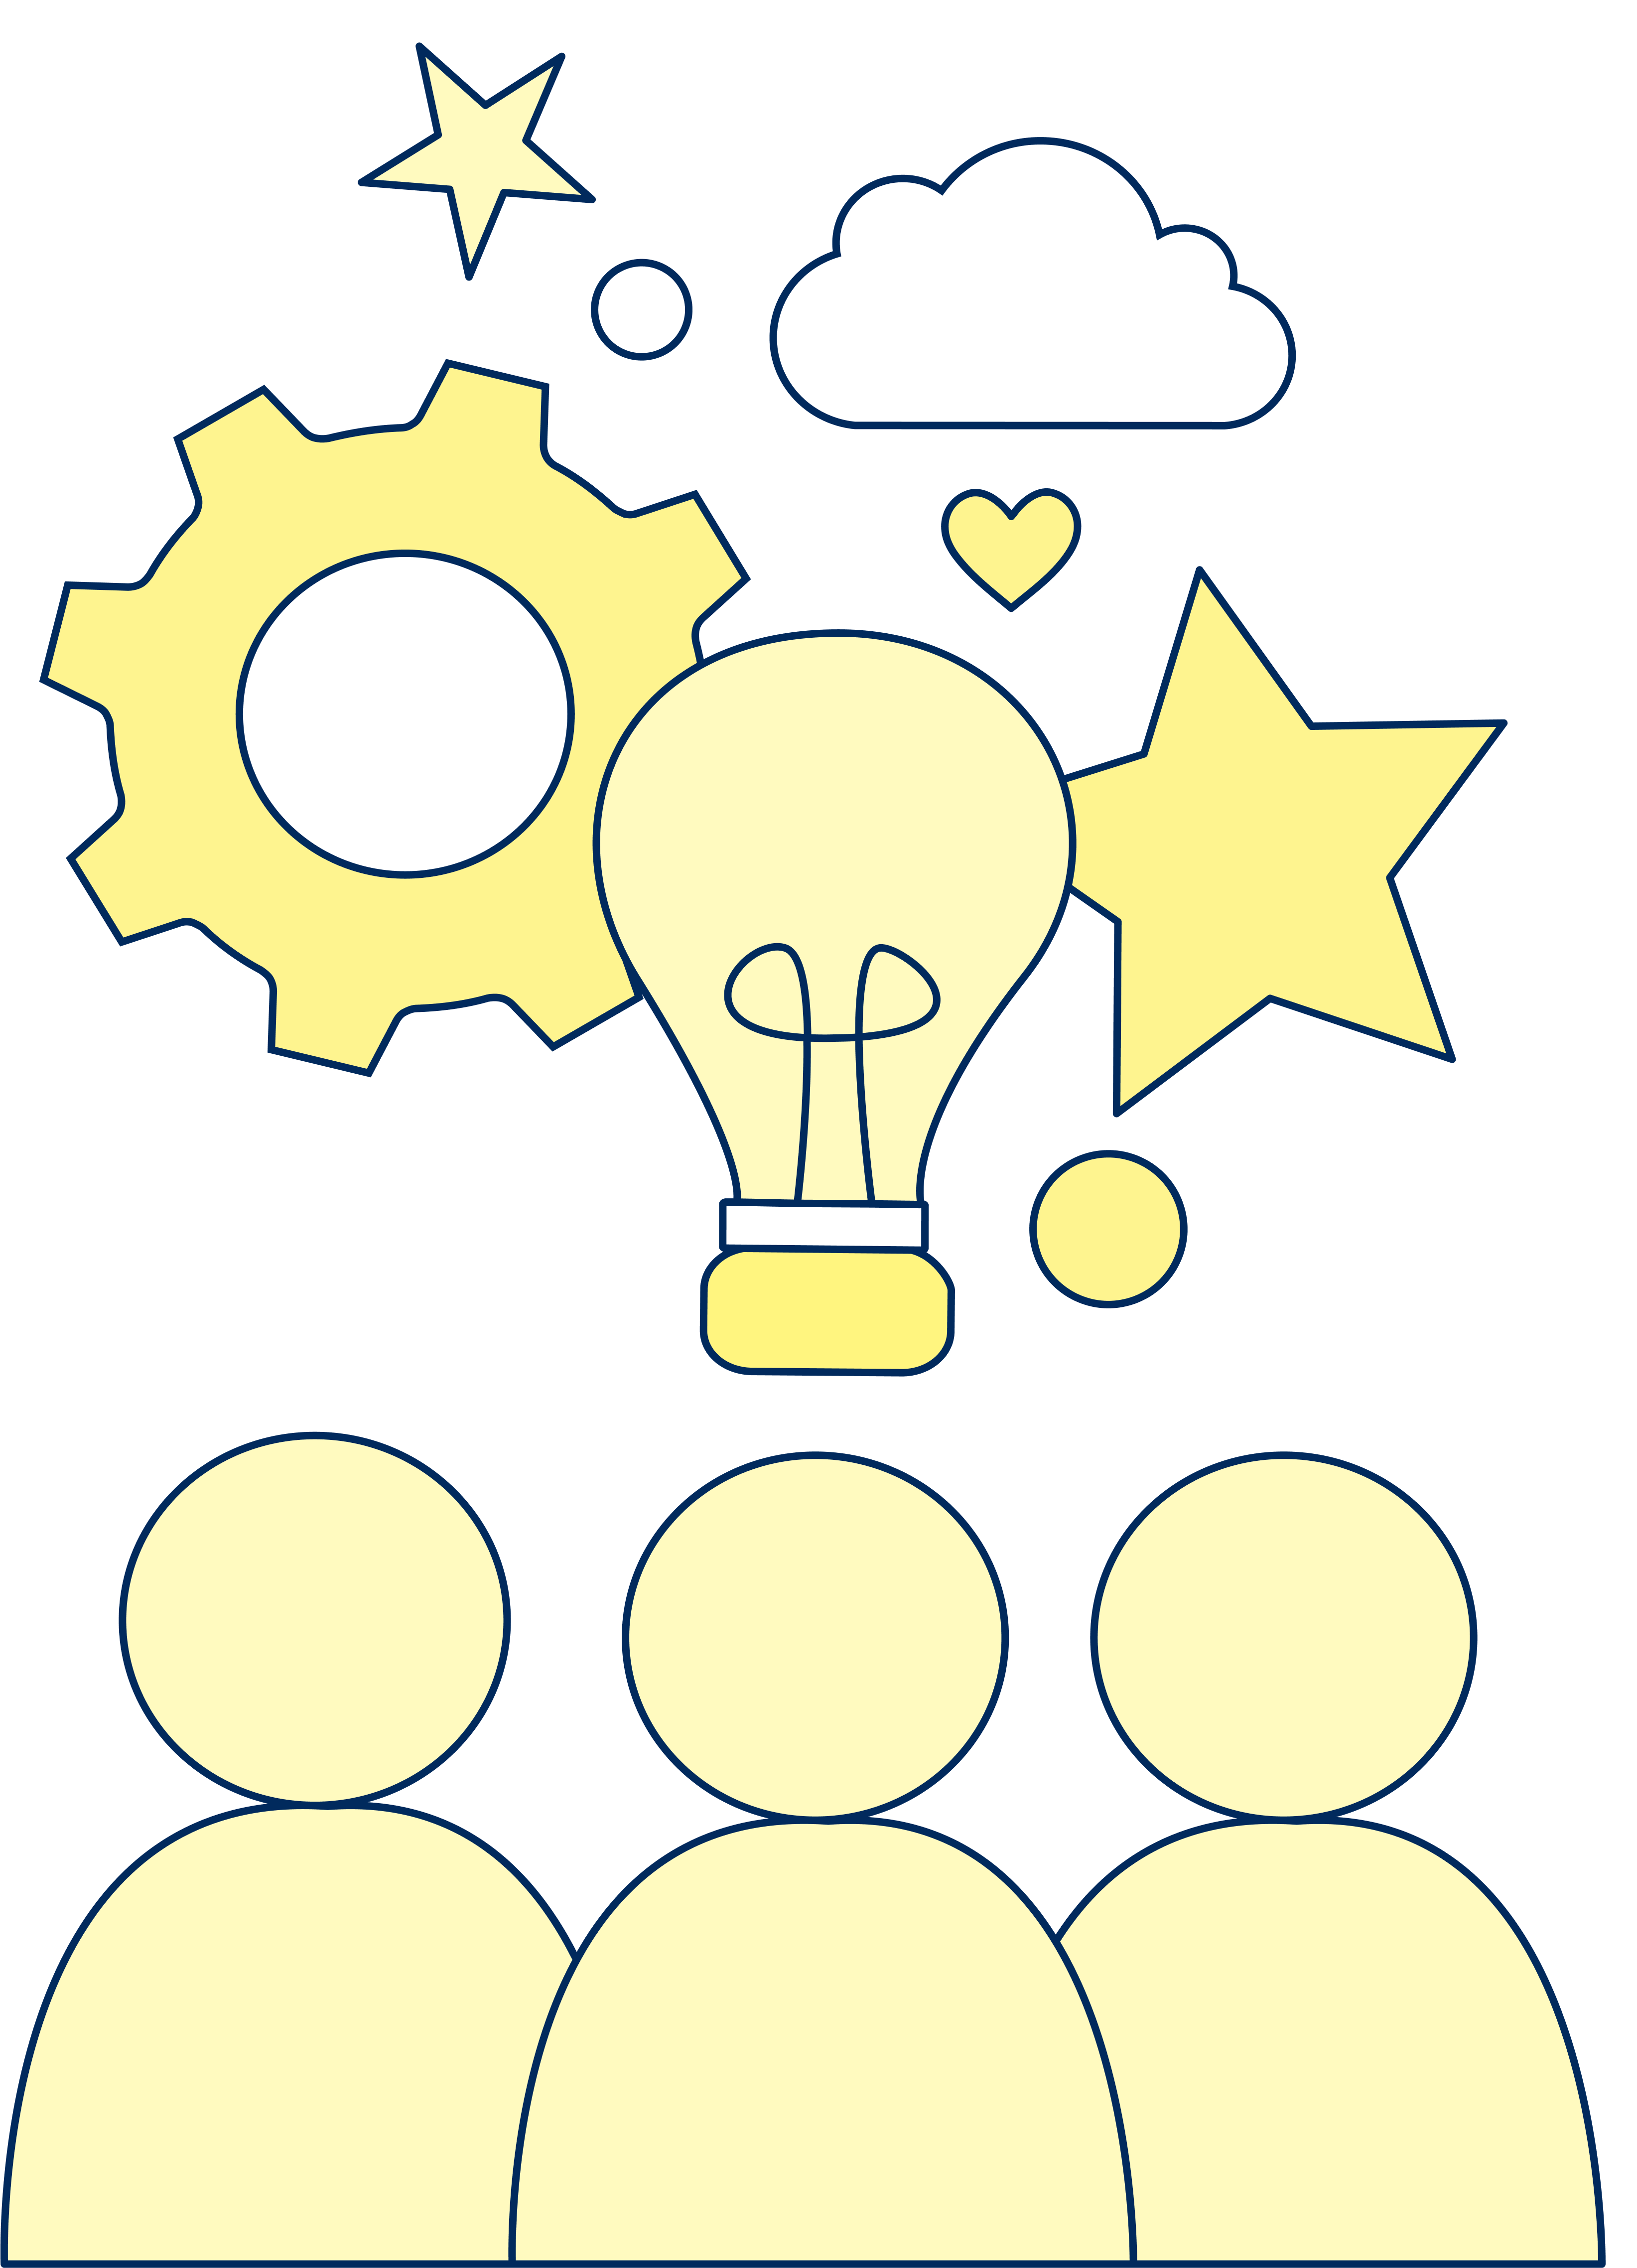 3 people with light bulb, gear, star and cloud above